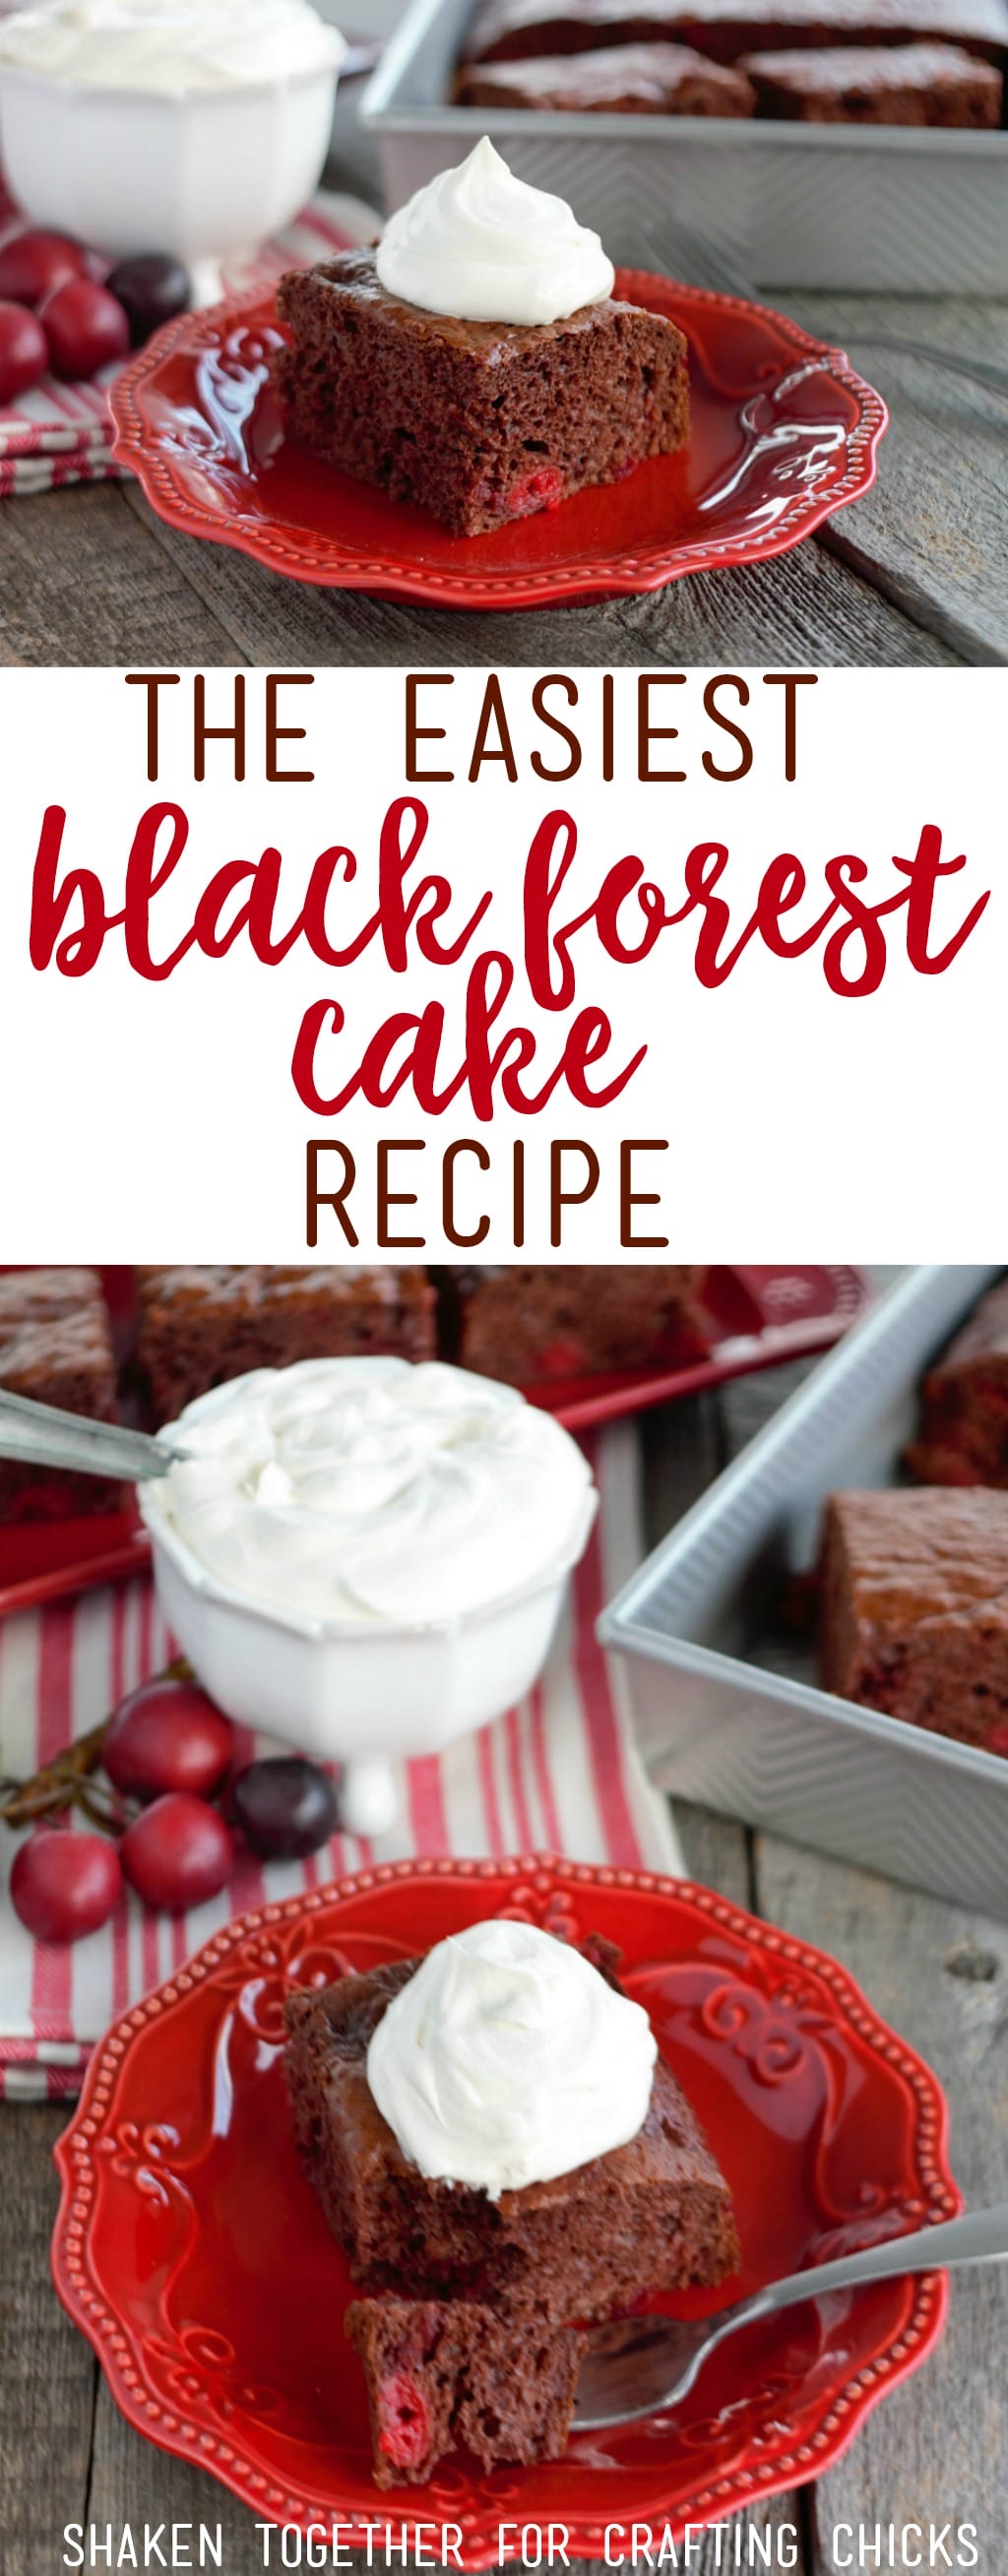 Need an unbelievably easy dessert? You'll love this Black Forest Cake Recipe with just 4 ingredients!